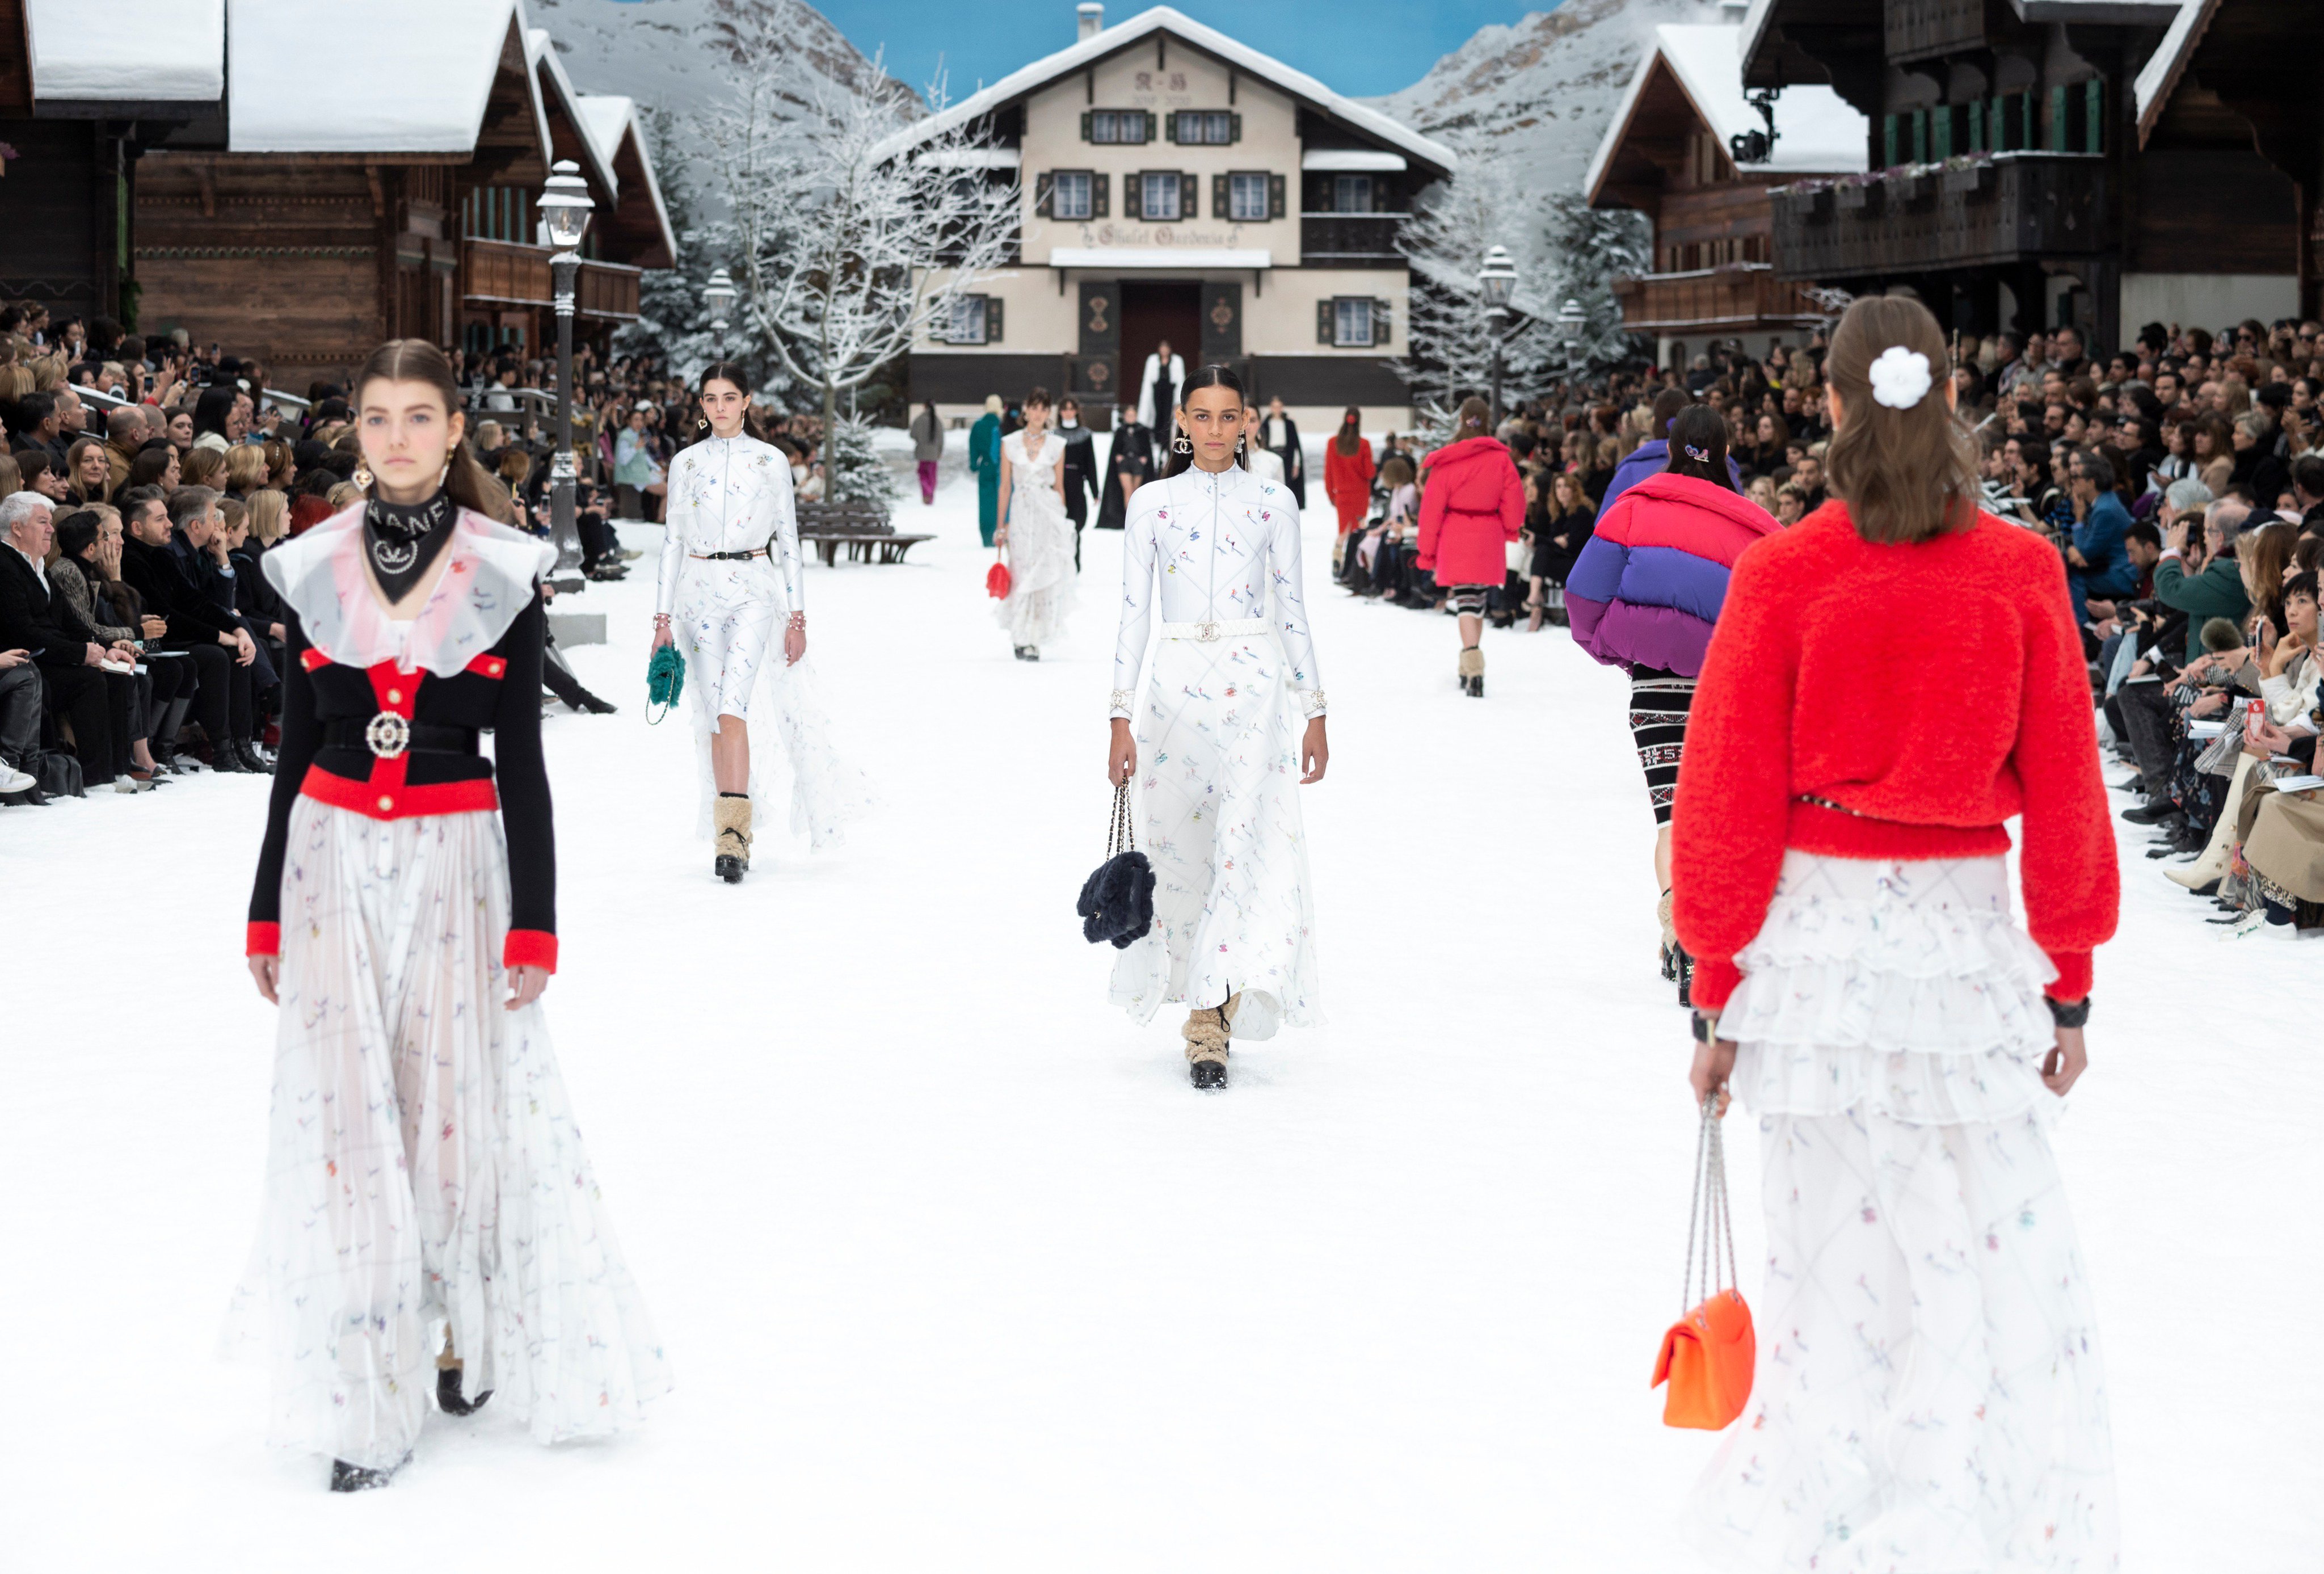 CHANEL on X: Flounced chiffon dresses and ski suits feature prints covered  in miniature skiers, hurtling down slopes among ski lifts and cable cars.  #CHANELintheSnow #PFW More on    / X